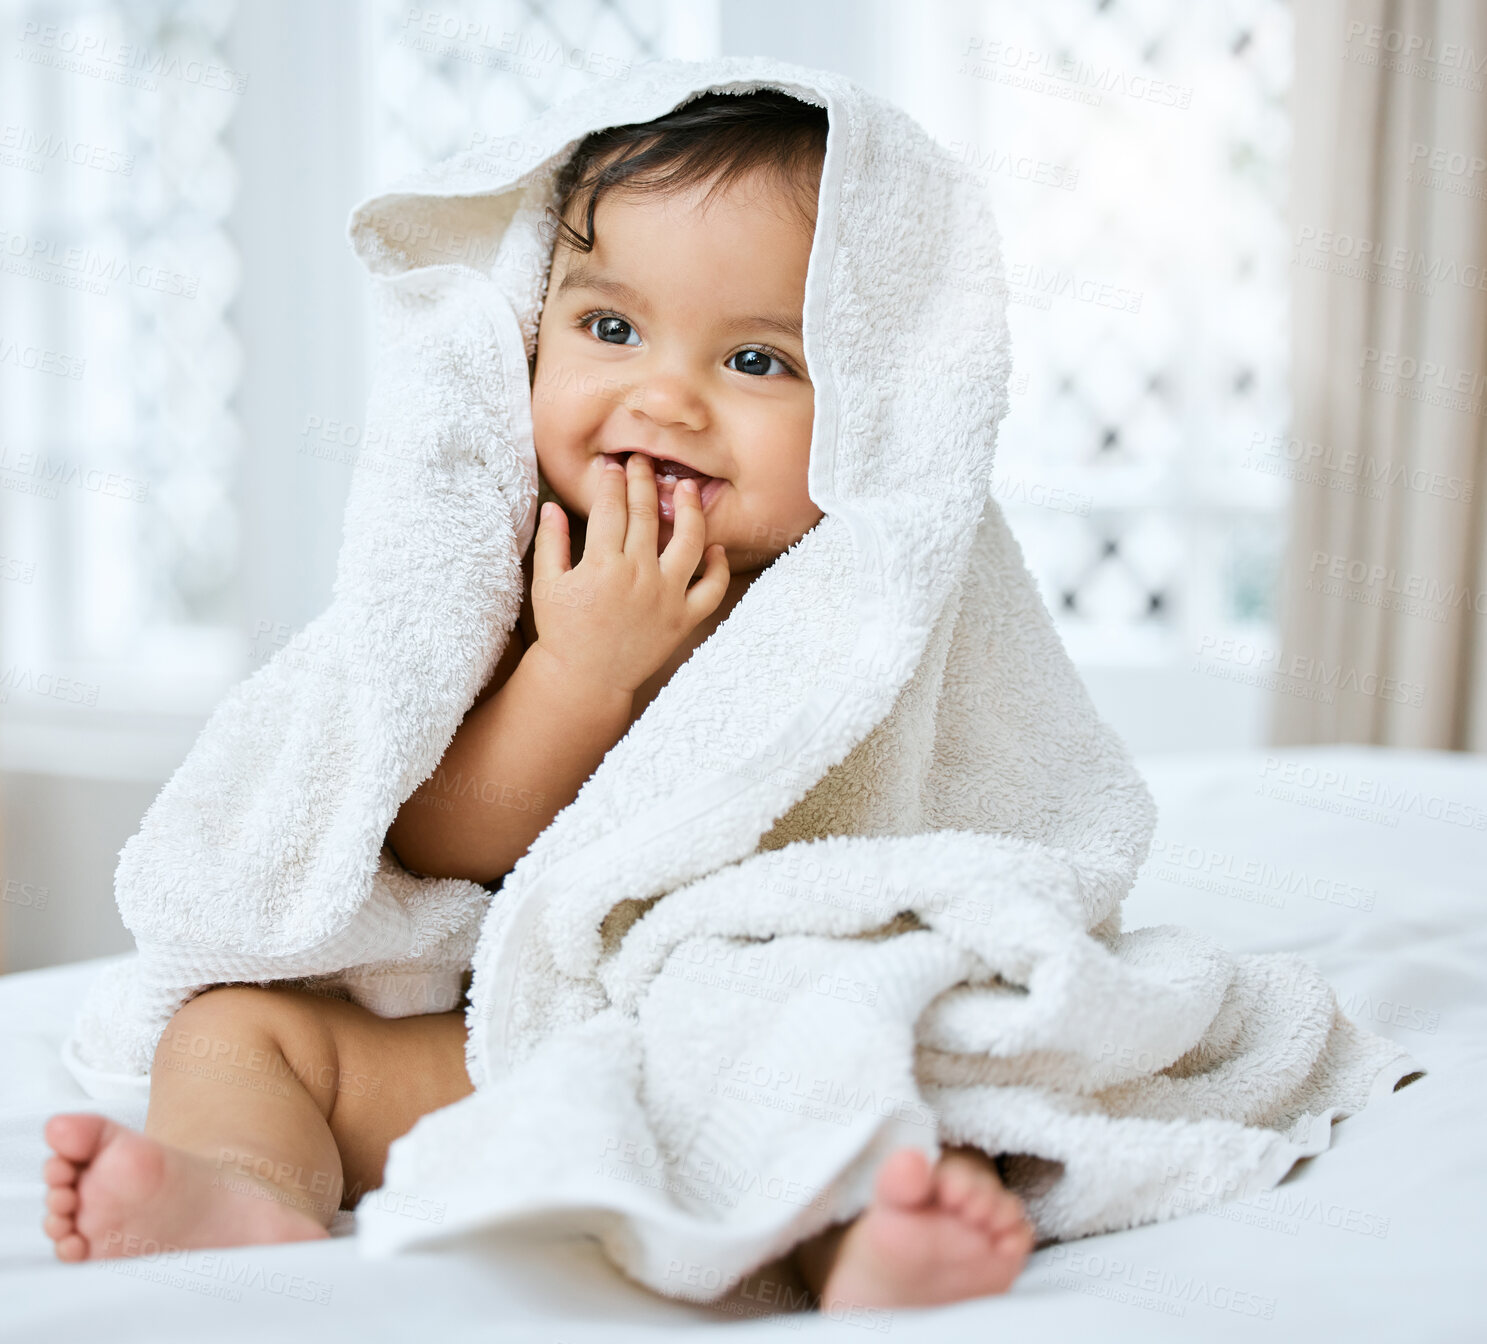 Buy stock photo Shot of an adorable baby covered in a towel after bath time